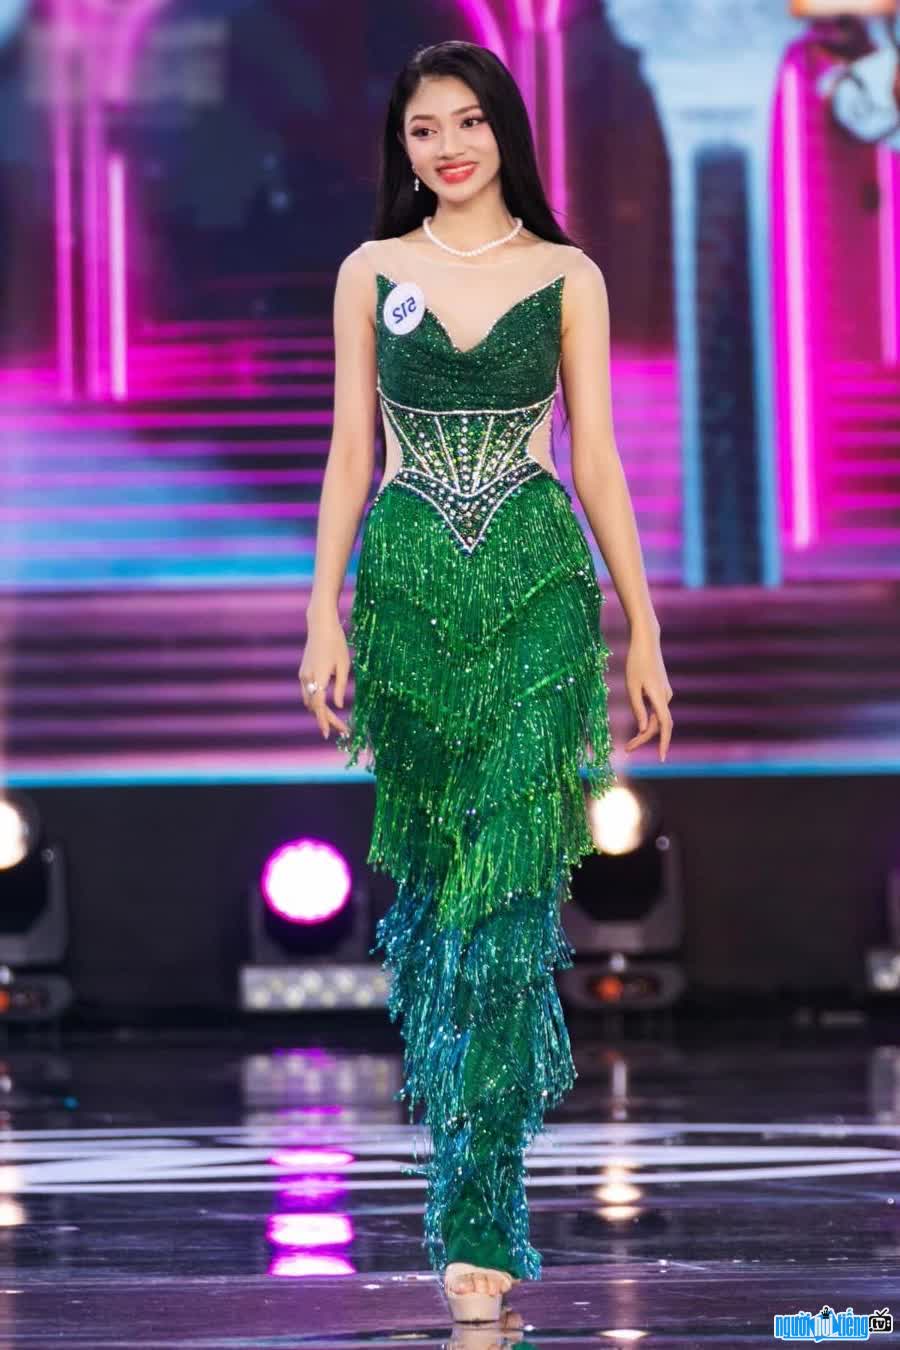 Image of runner-up Dao Thi Hien on the stage of a beauty contest